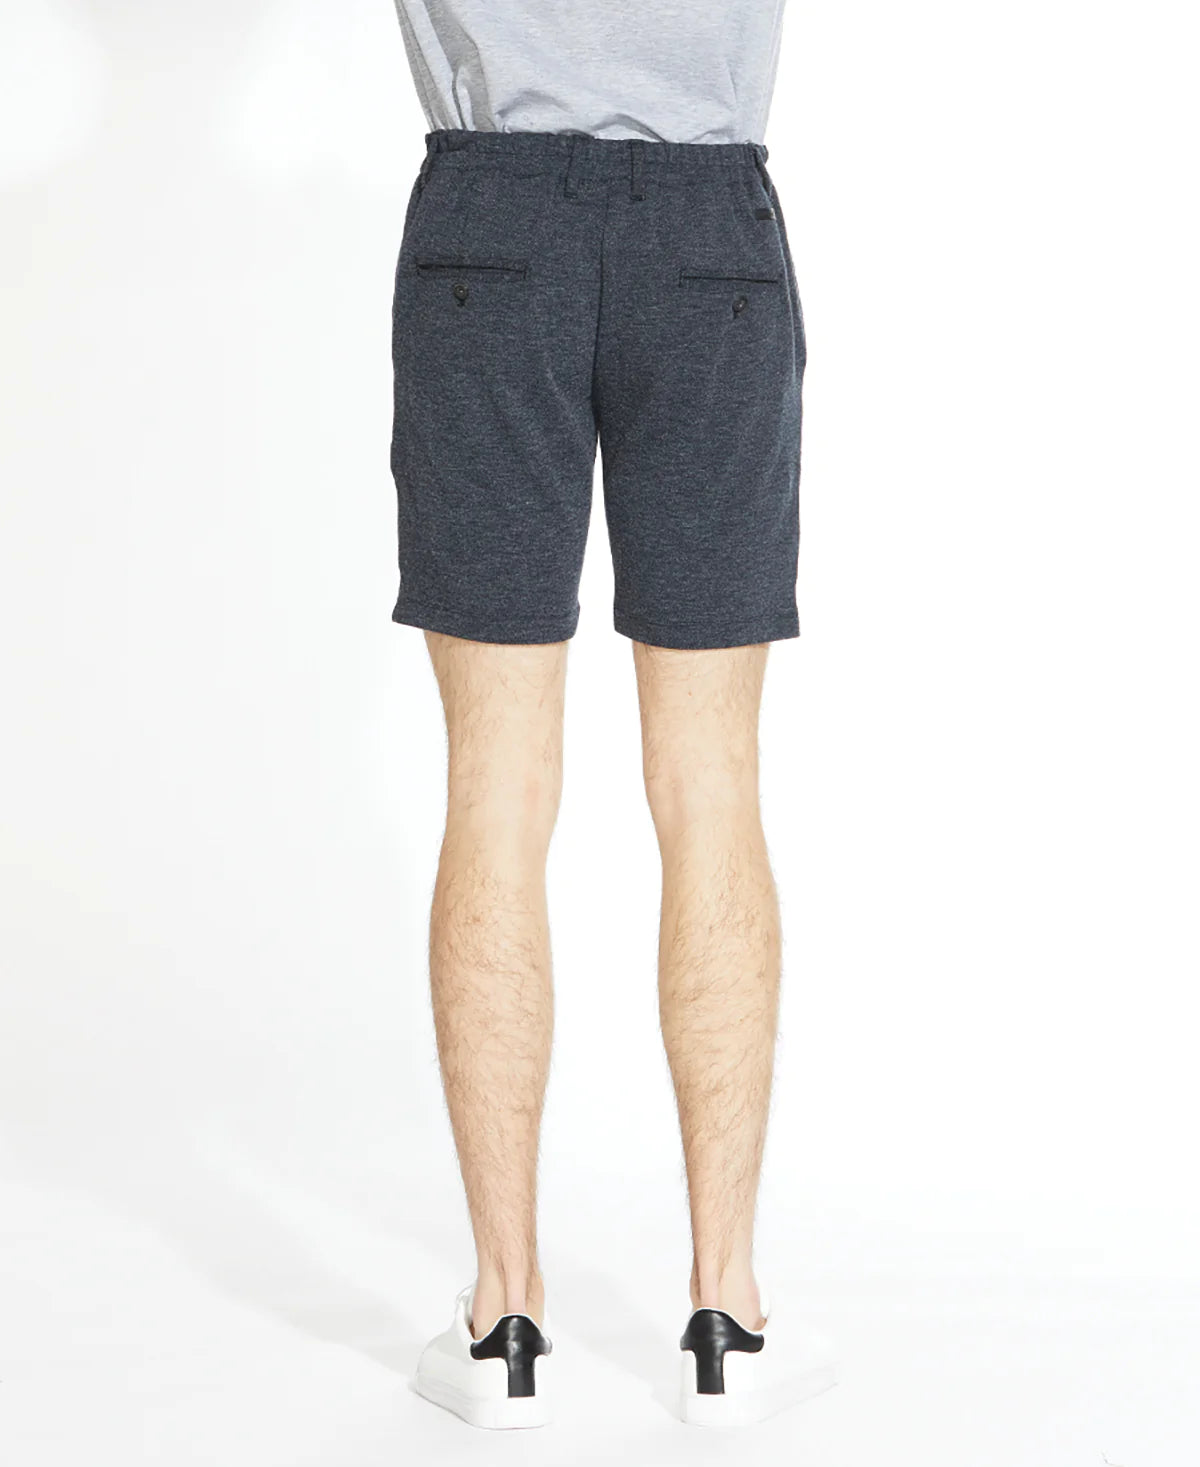 Templeton Knit Shorts | Heather Charcoal